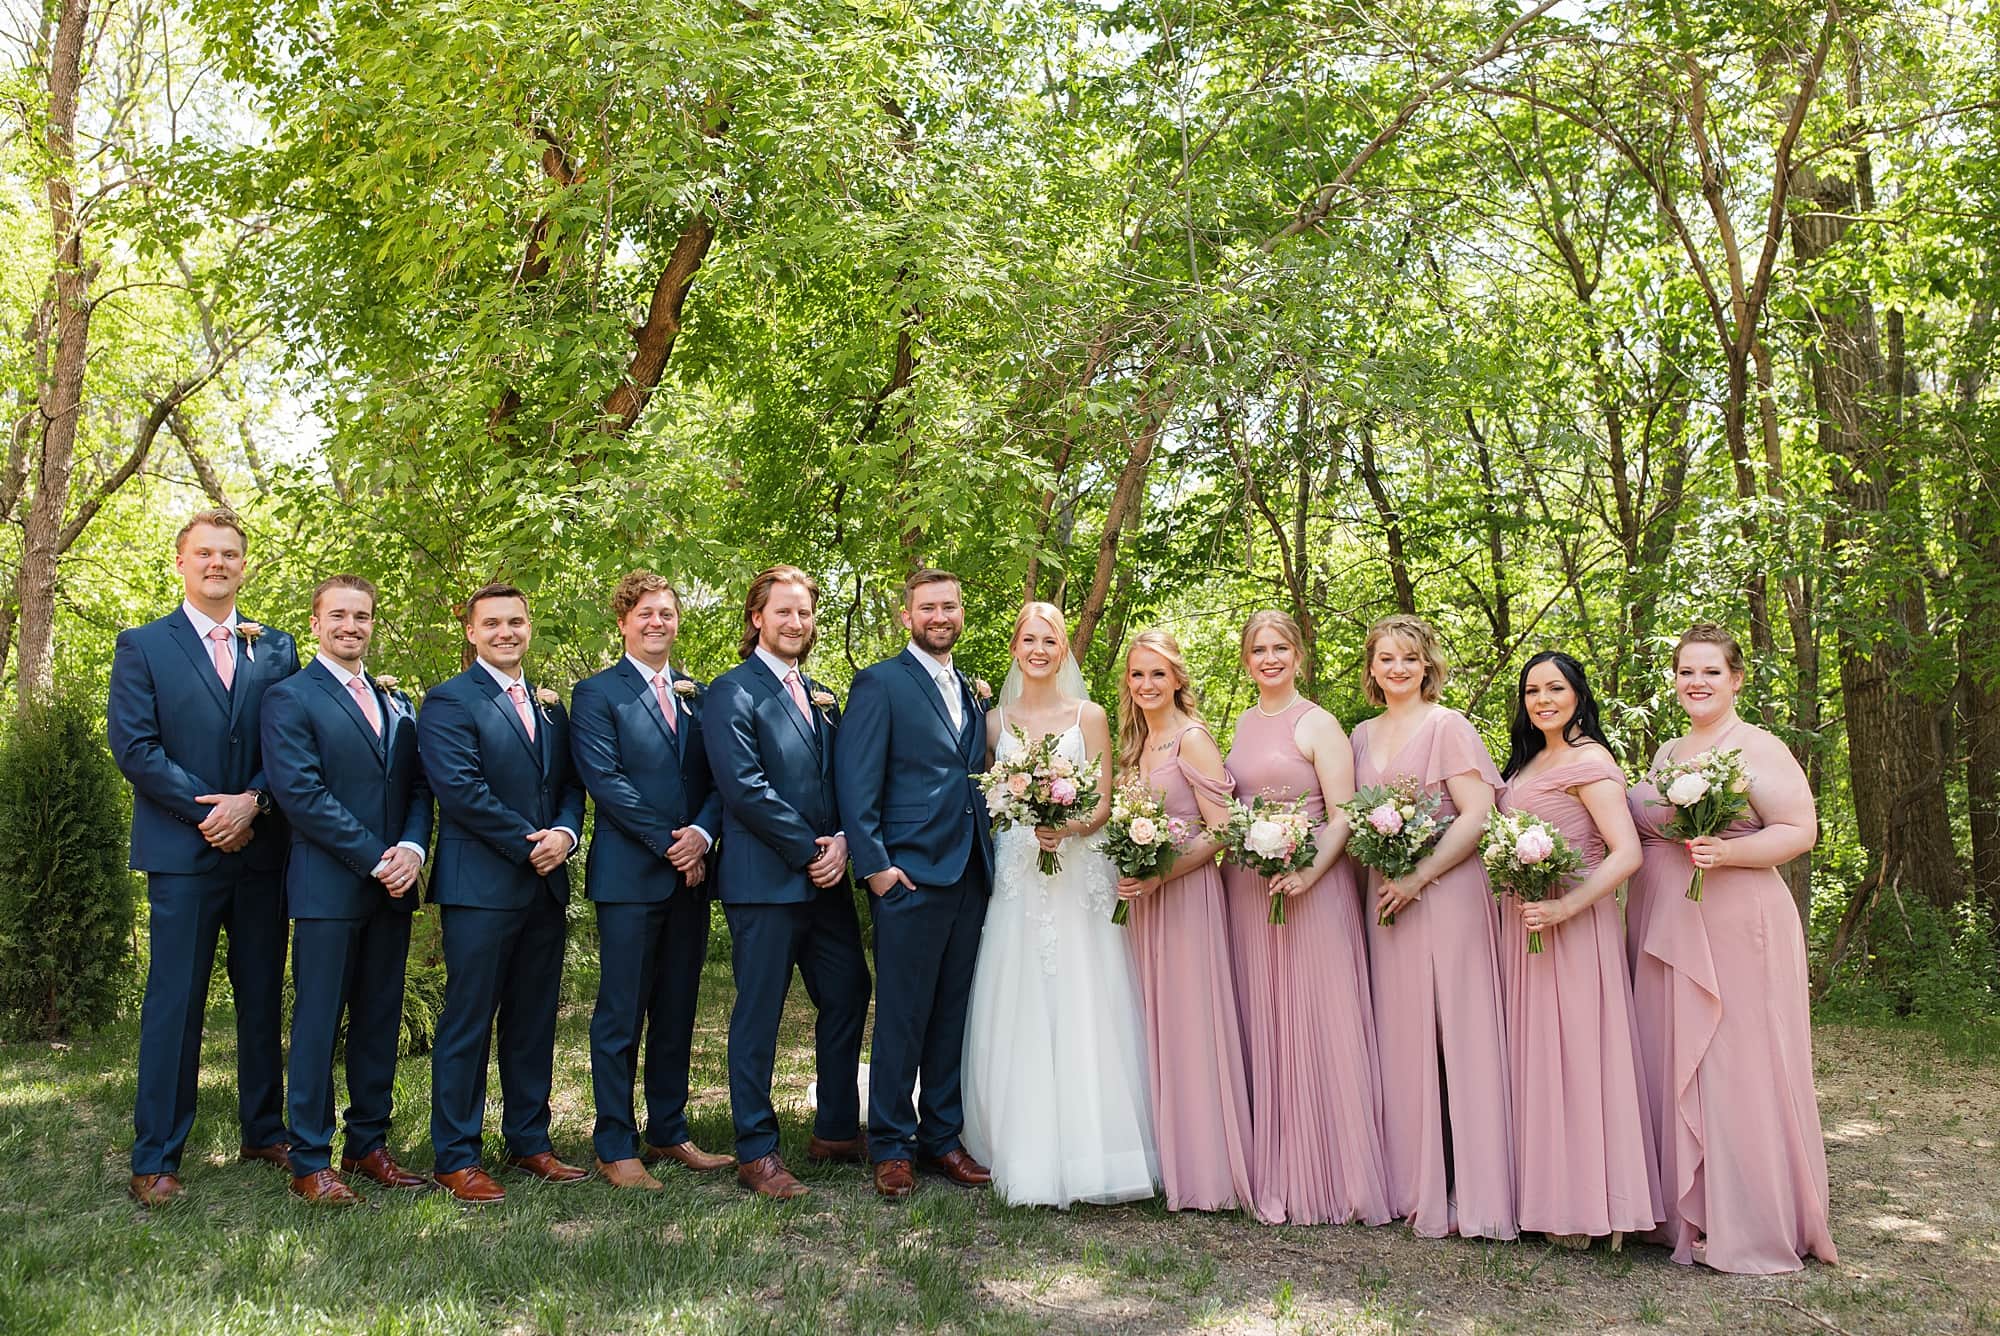 Wedding party in navy and soft pink smile for photos at  Romantic Moons Event Center